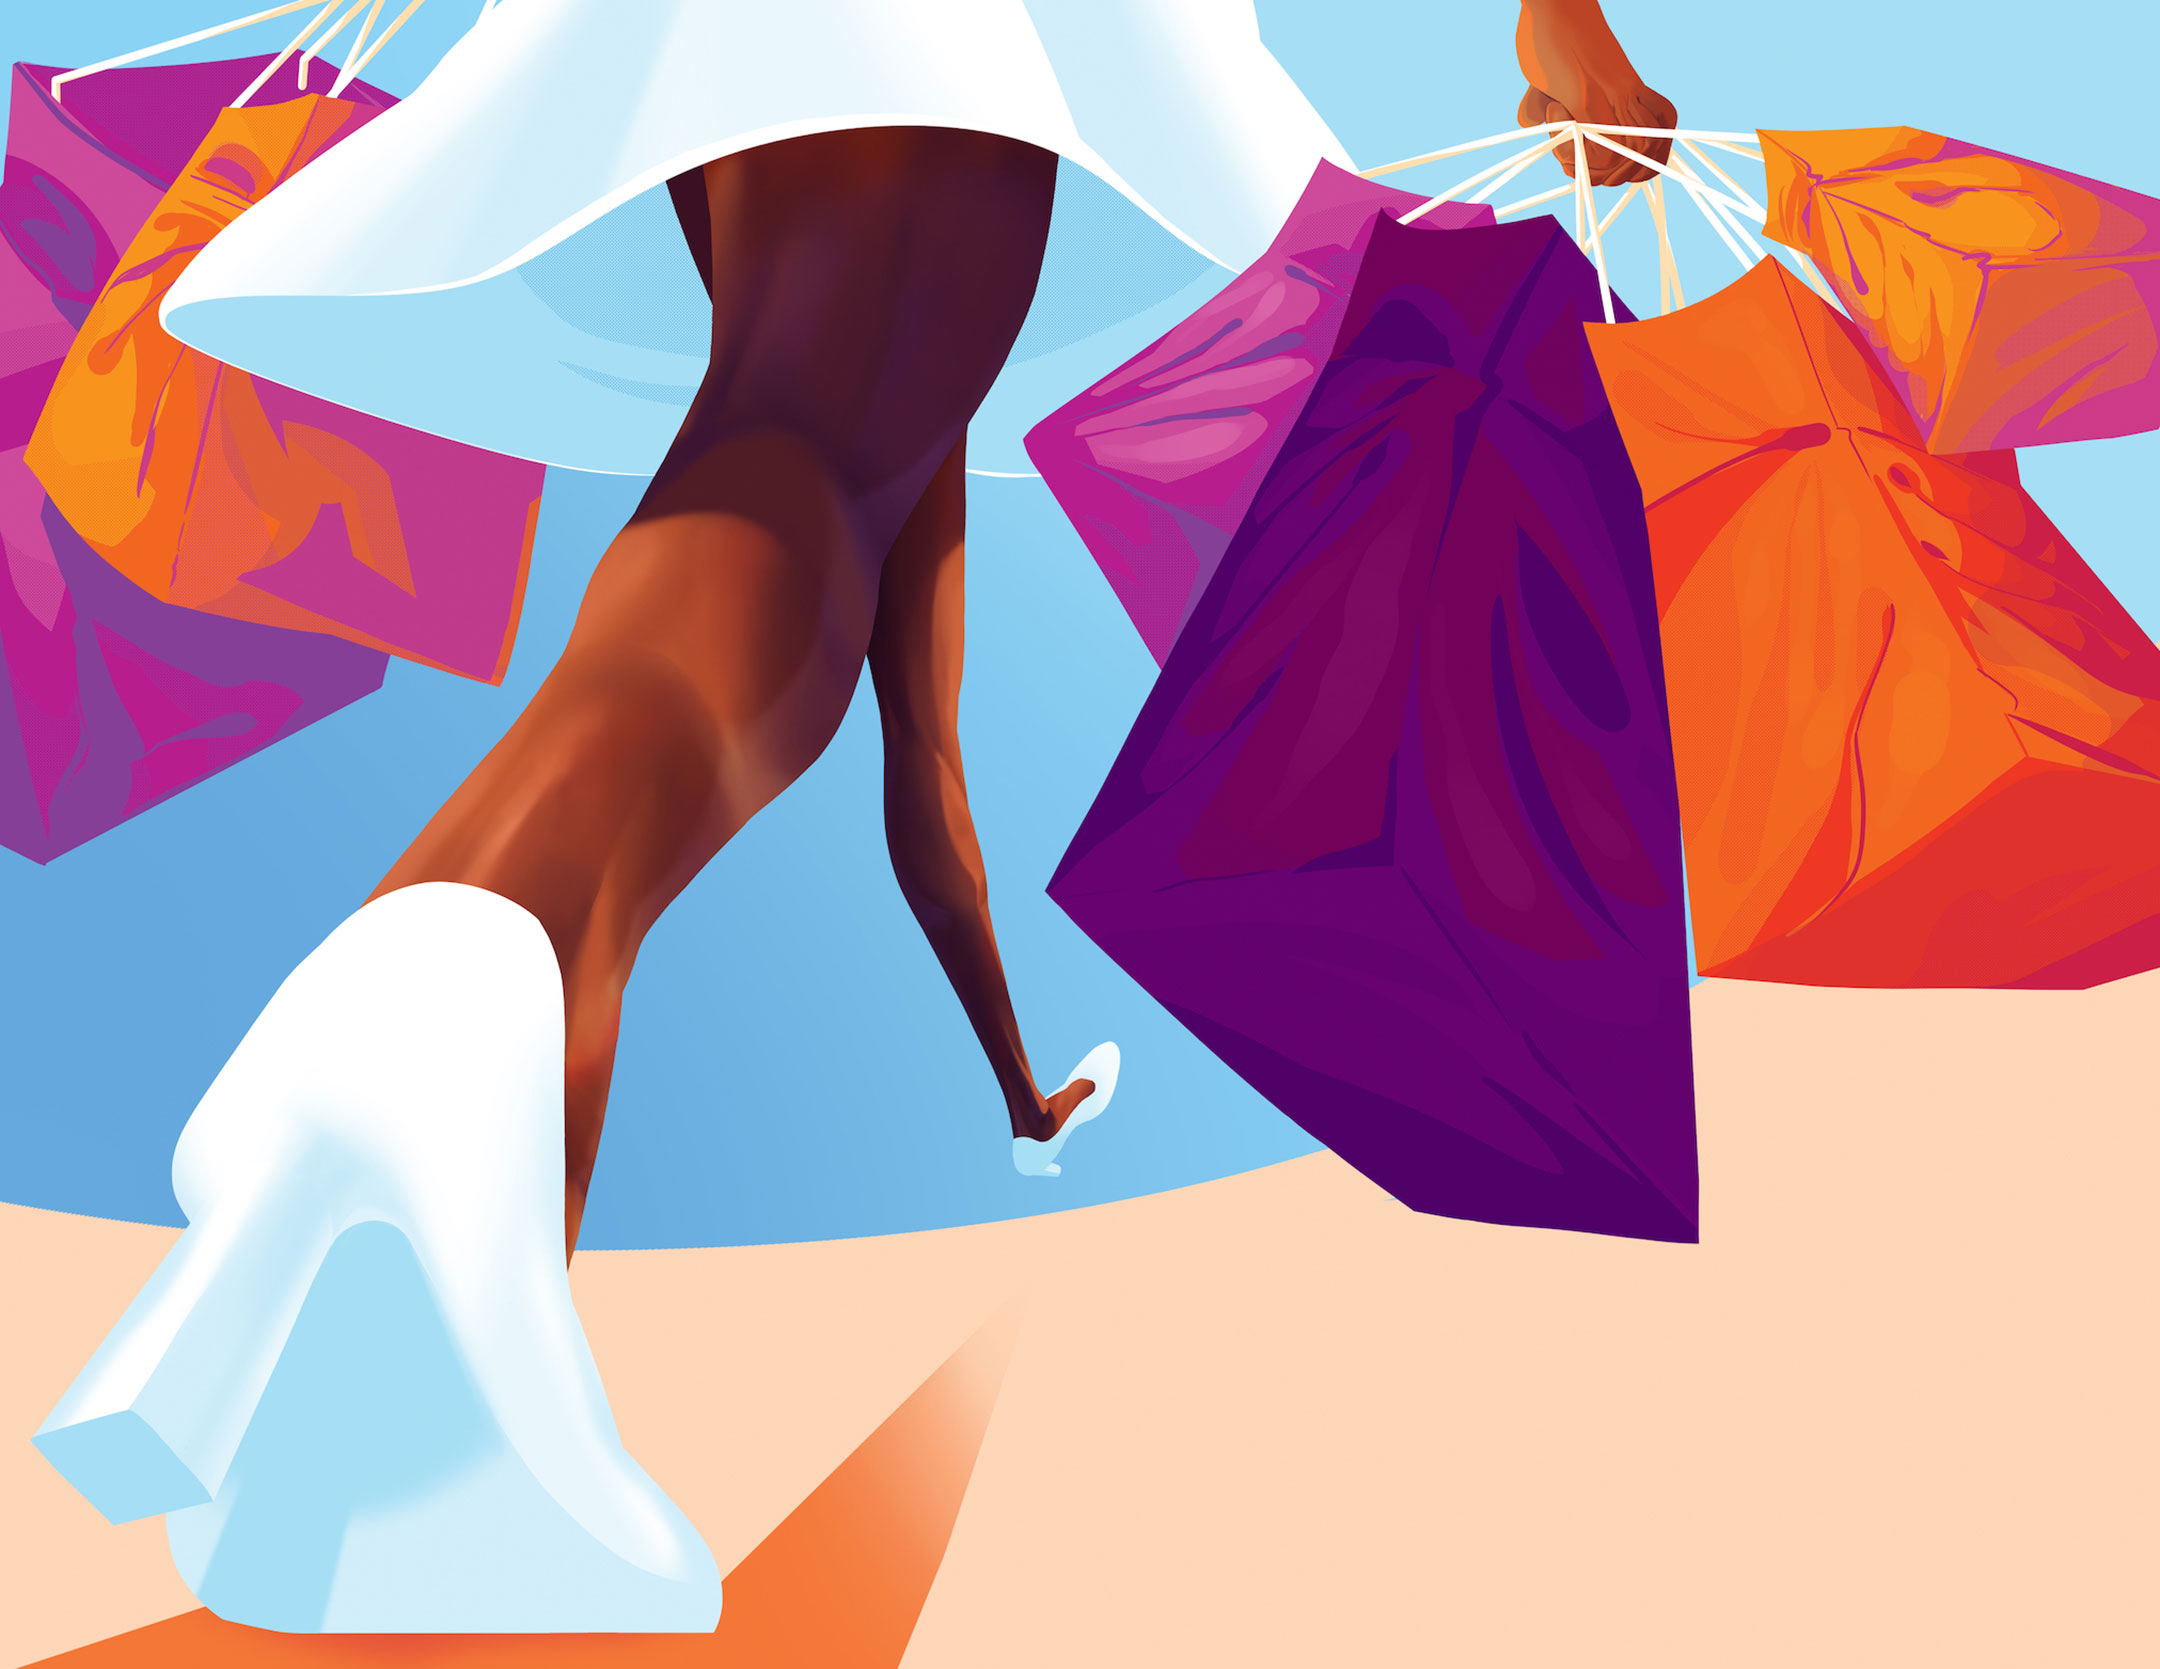 Illustration of a woman in a white dress and shoes, seen from below the calf, walking away while carrying purple and orange shopping bags